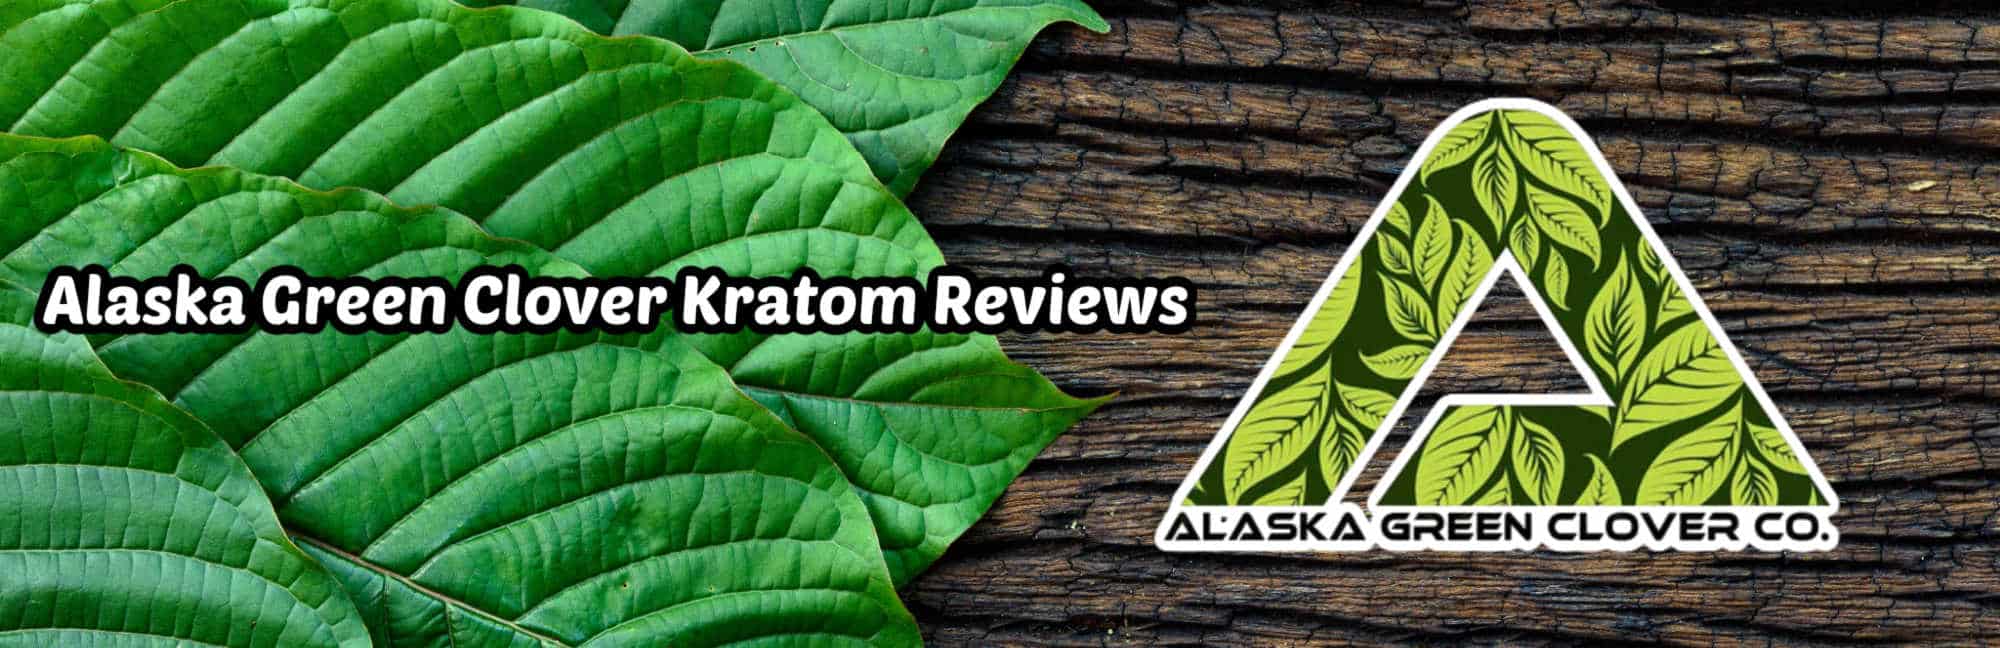 Alaska Green Clover : A Homegrown Kratom Brand You Need to Know About